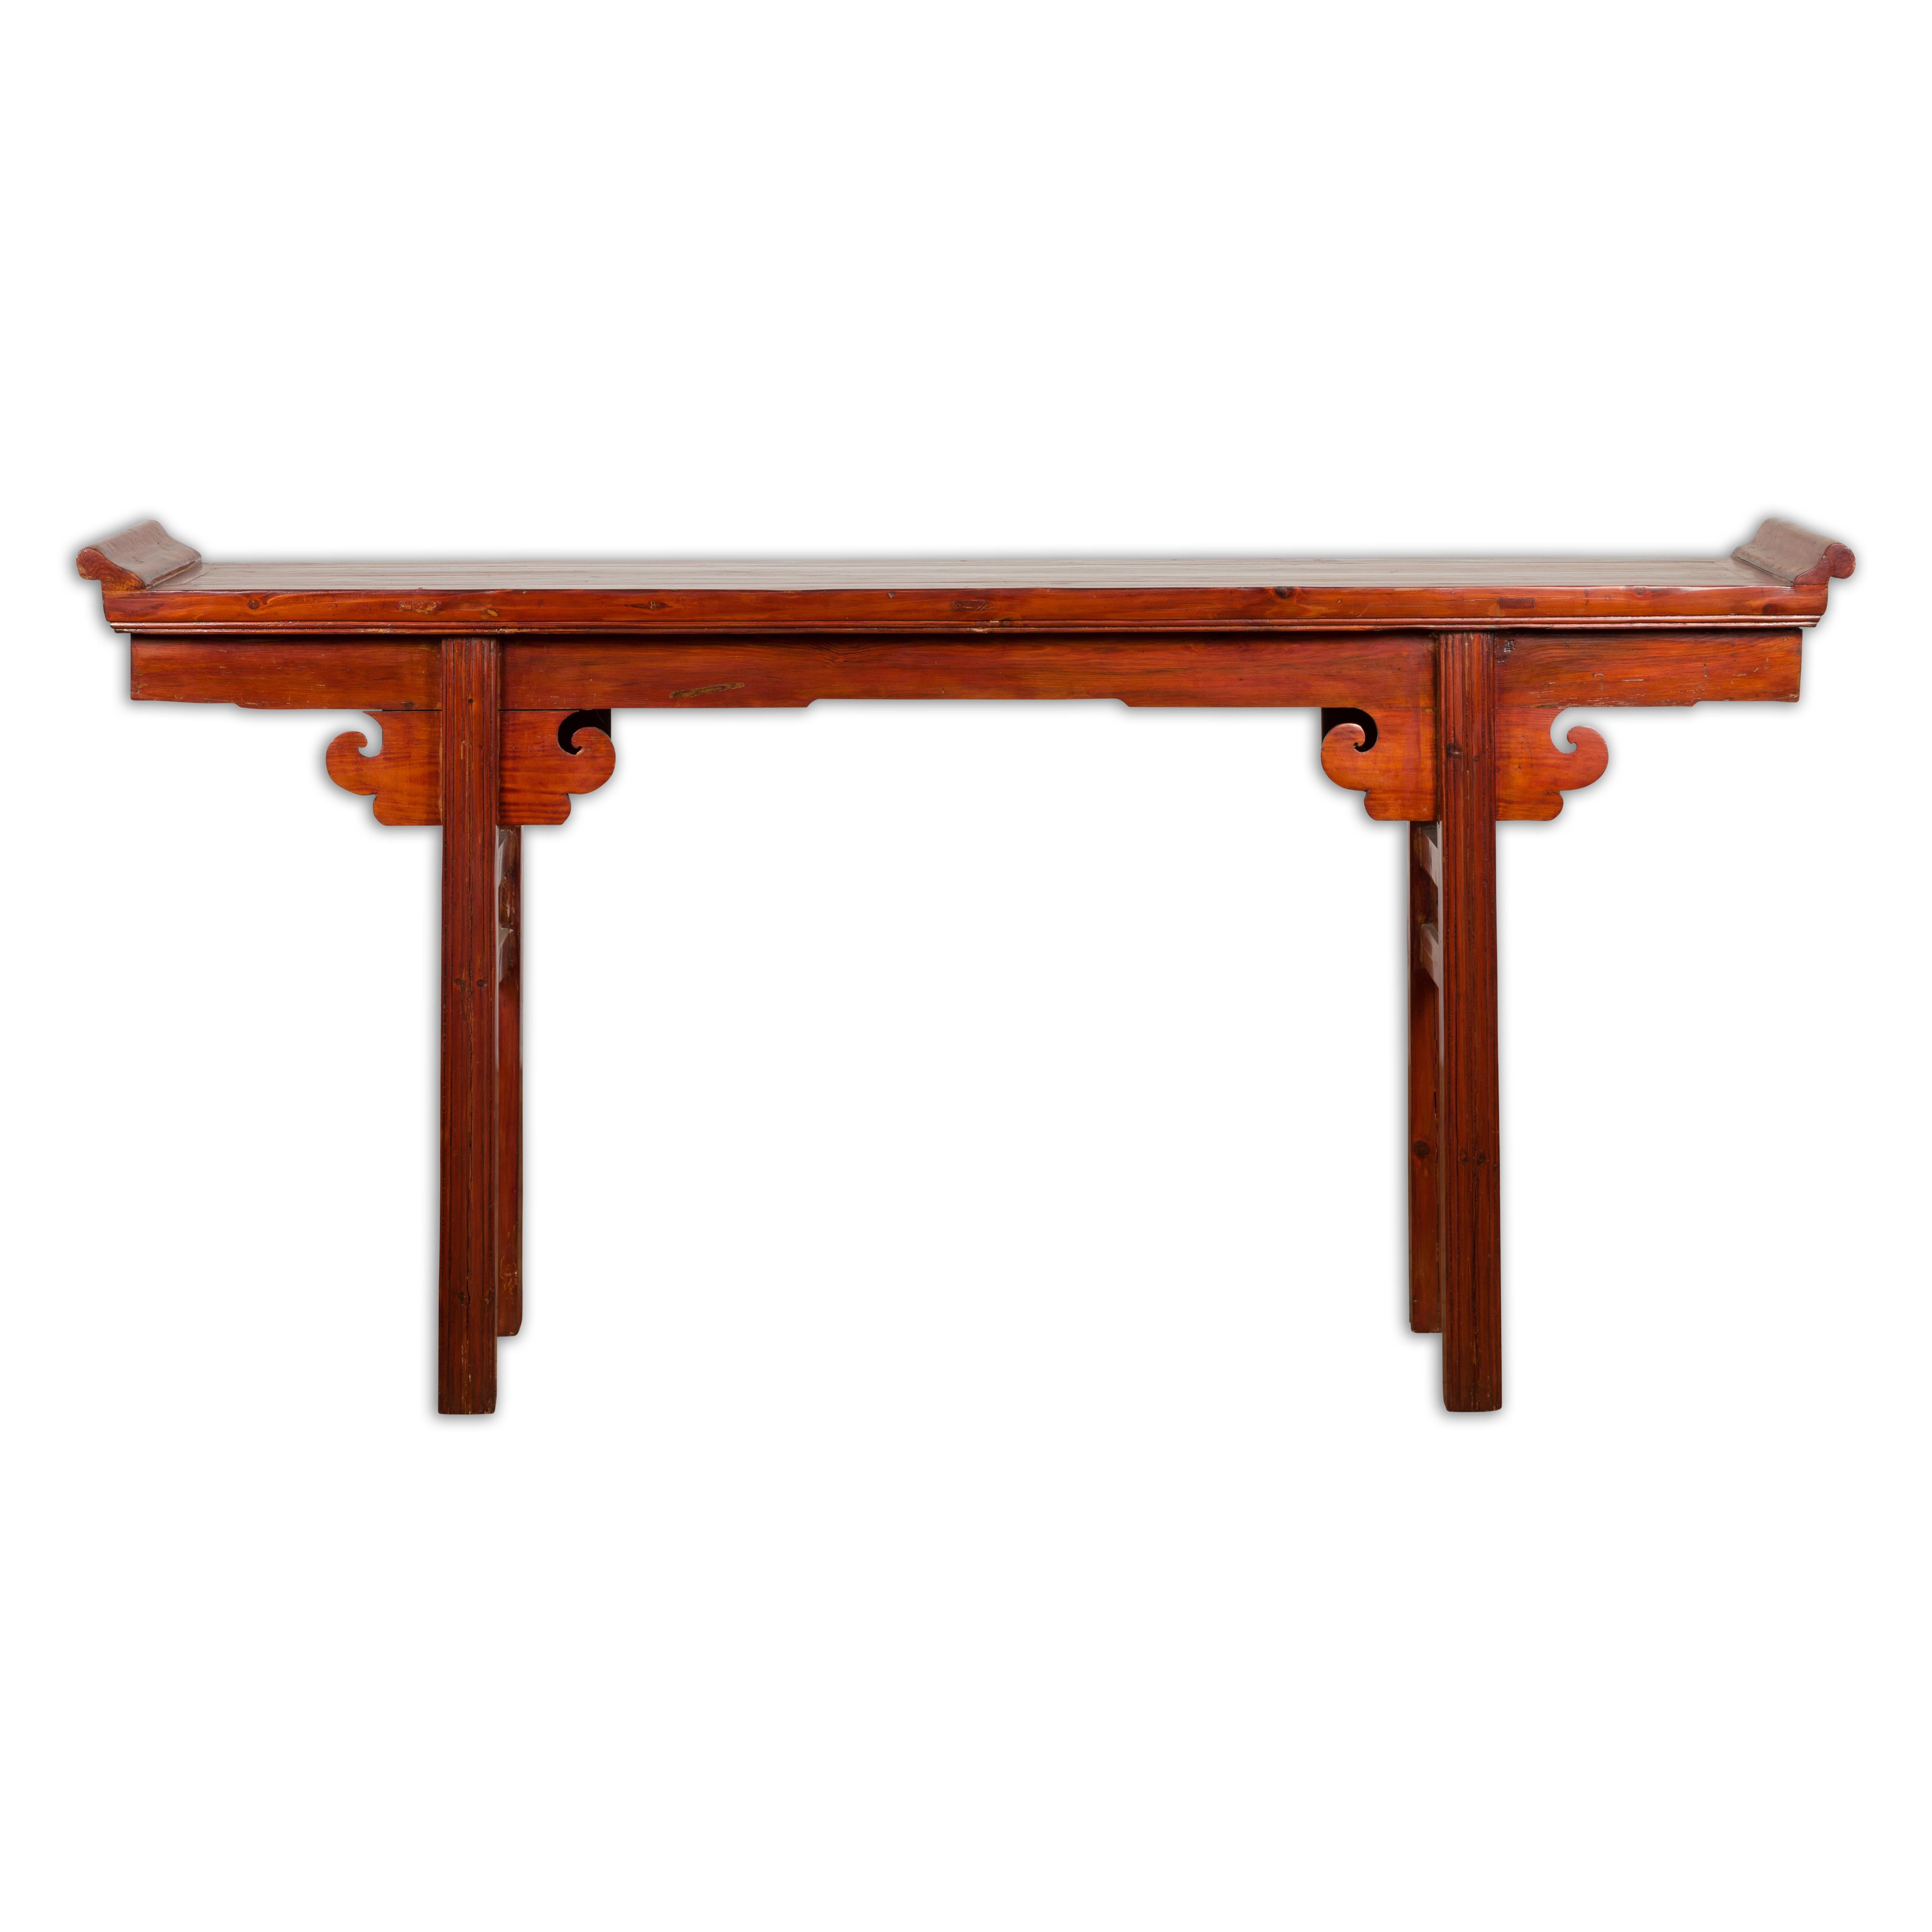 Qing Dynasty Altar Console Table with A Scrolled Wood Apron For Sale 13